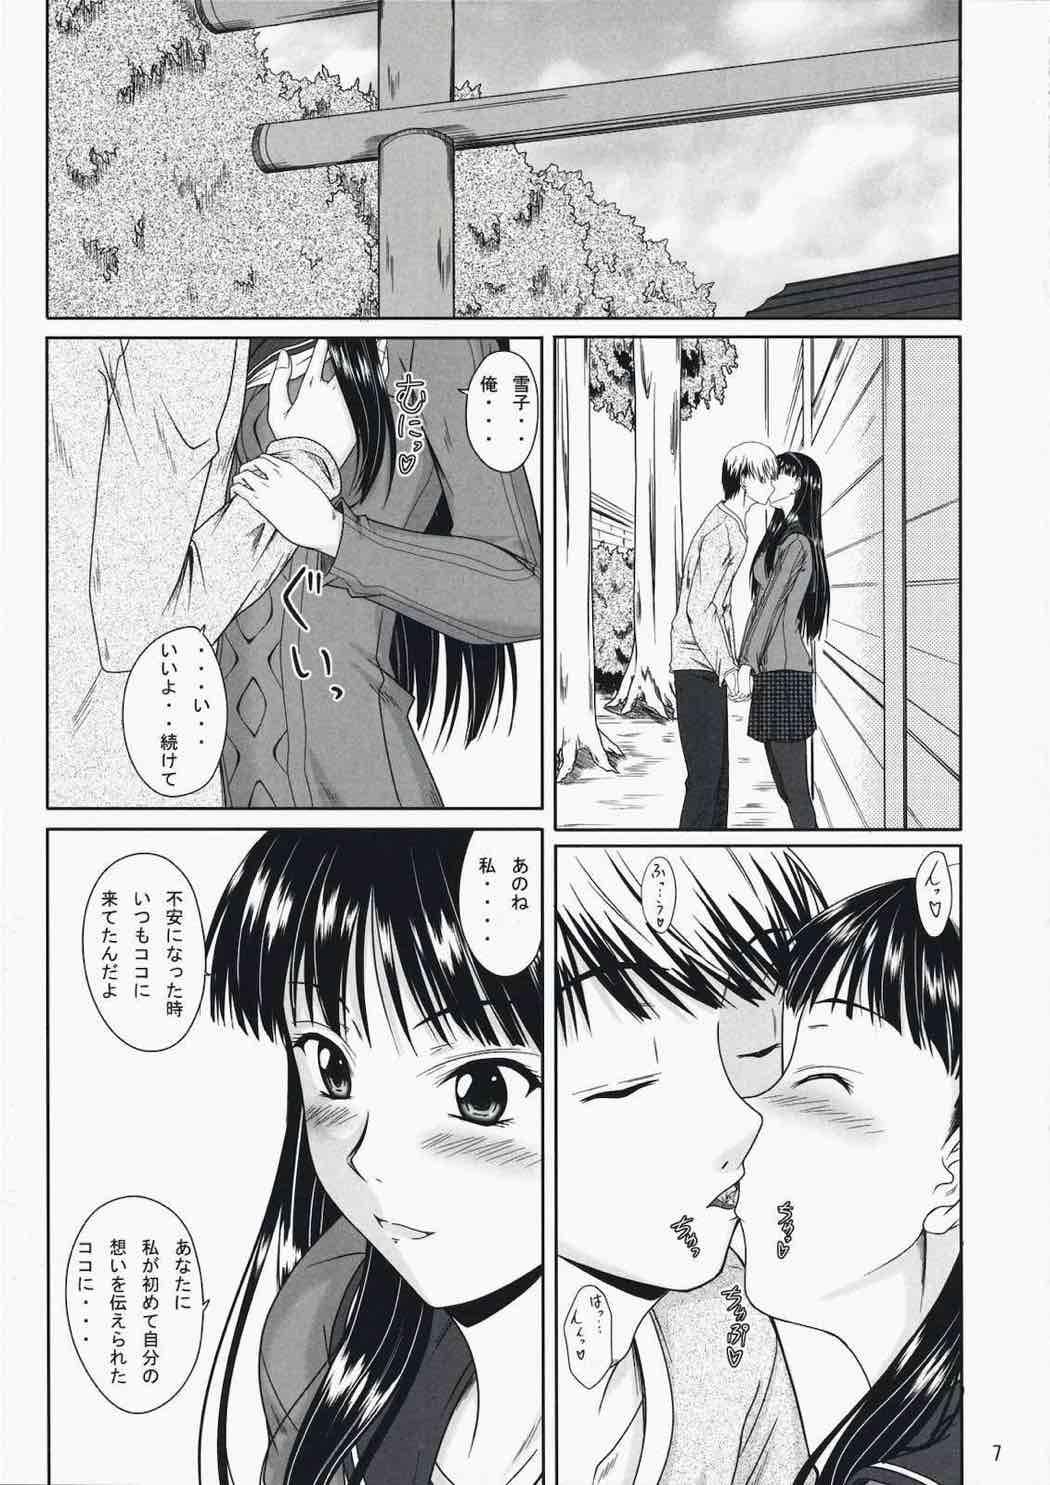 Brunet Love-Side - Persona 4 Porn - Page 6